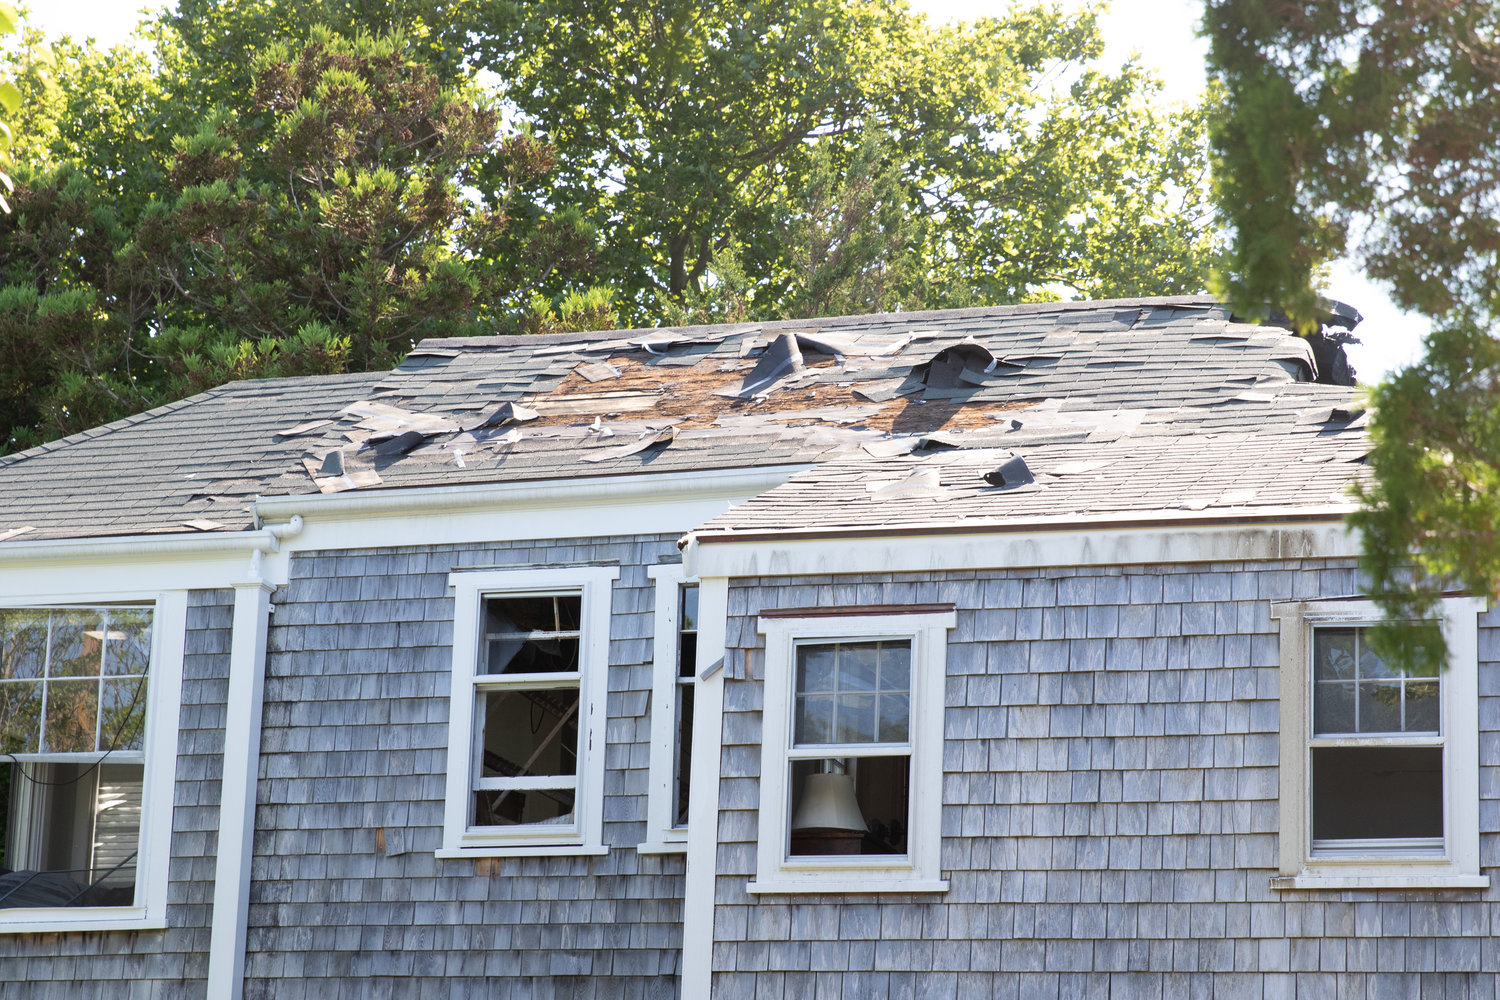 Debris on the roof of a nearby cottage.